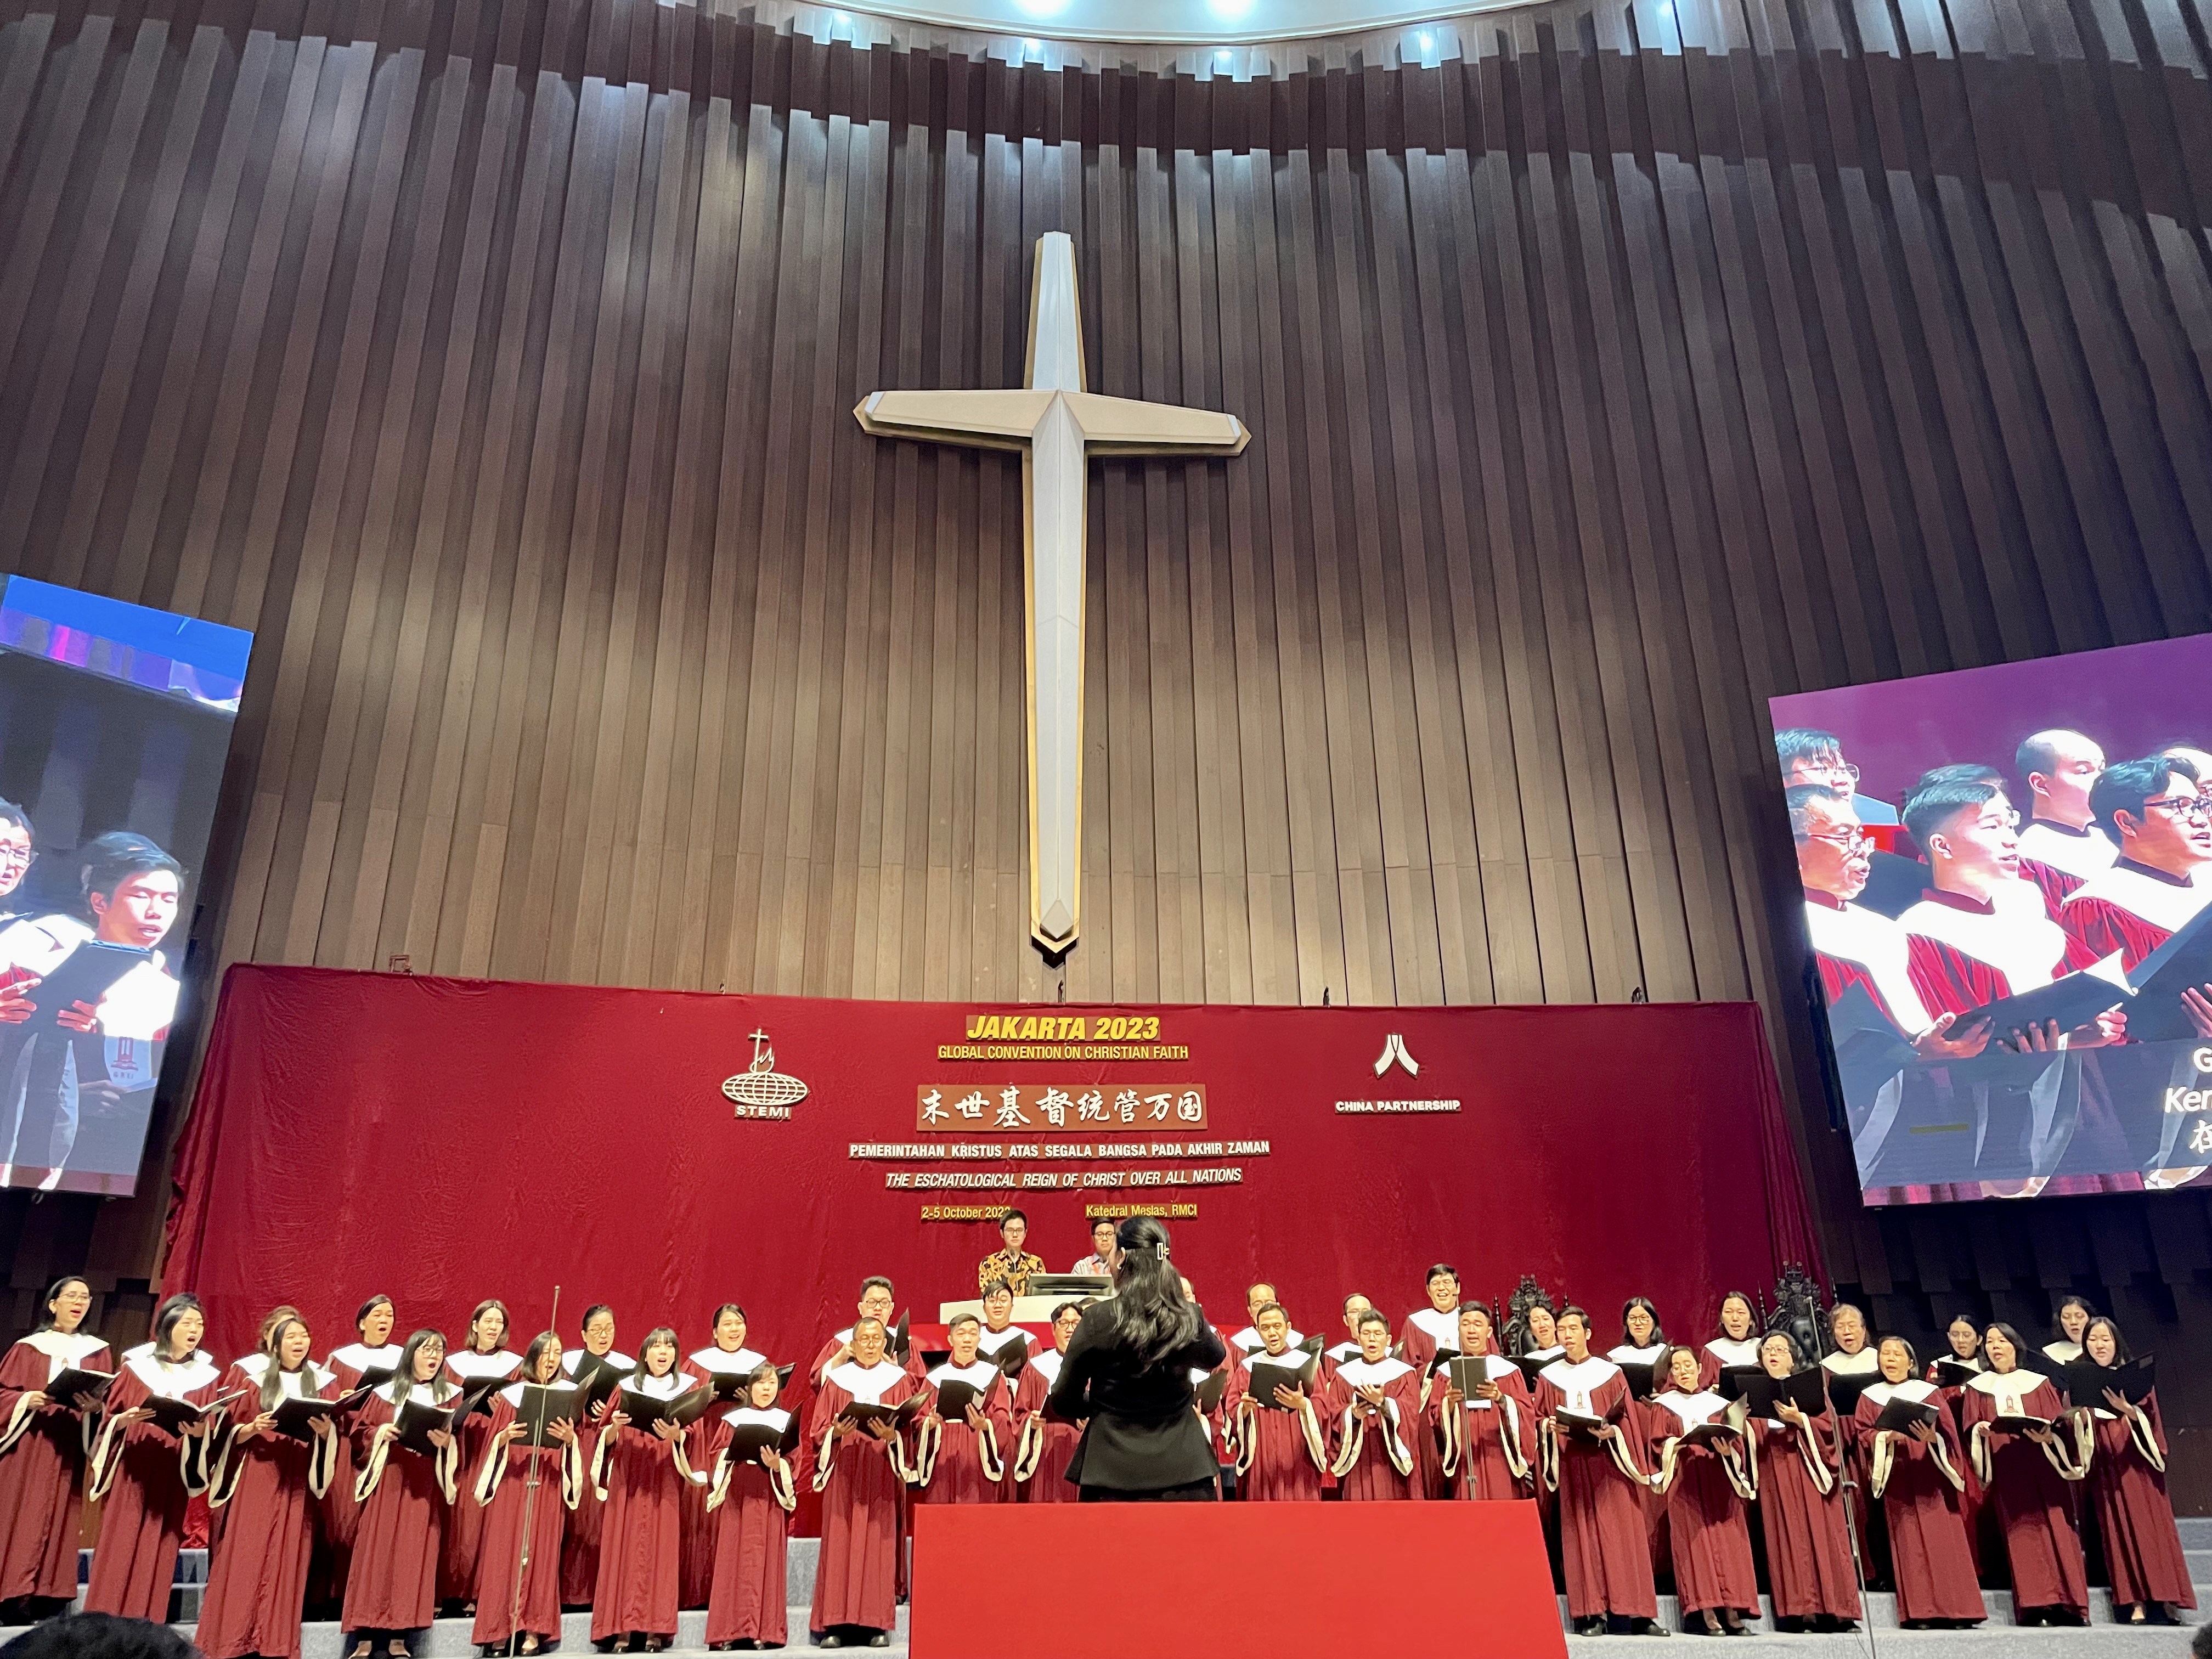 An Indonesian choir presented hymns during the Jakarta 2023 Global Convention on Christian Faith held in Jakarta, Indonesia, during October 2-5, 2023.